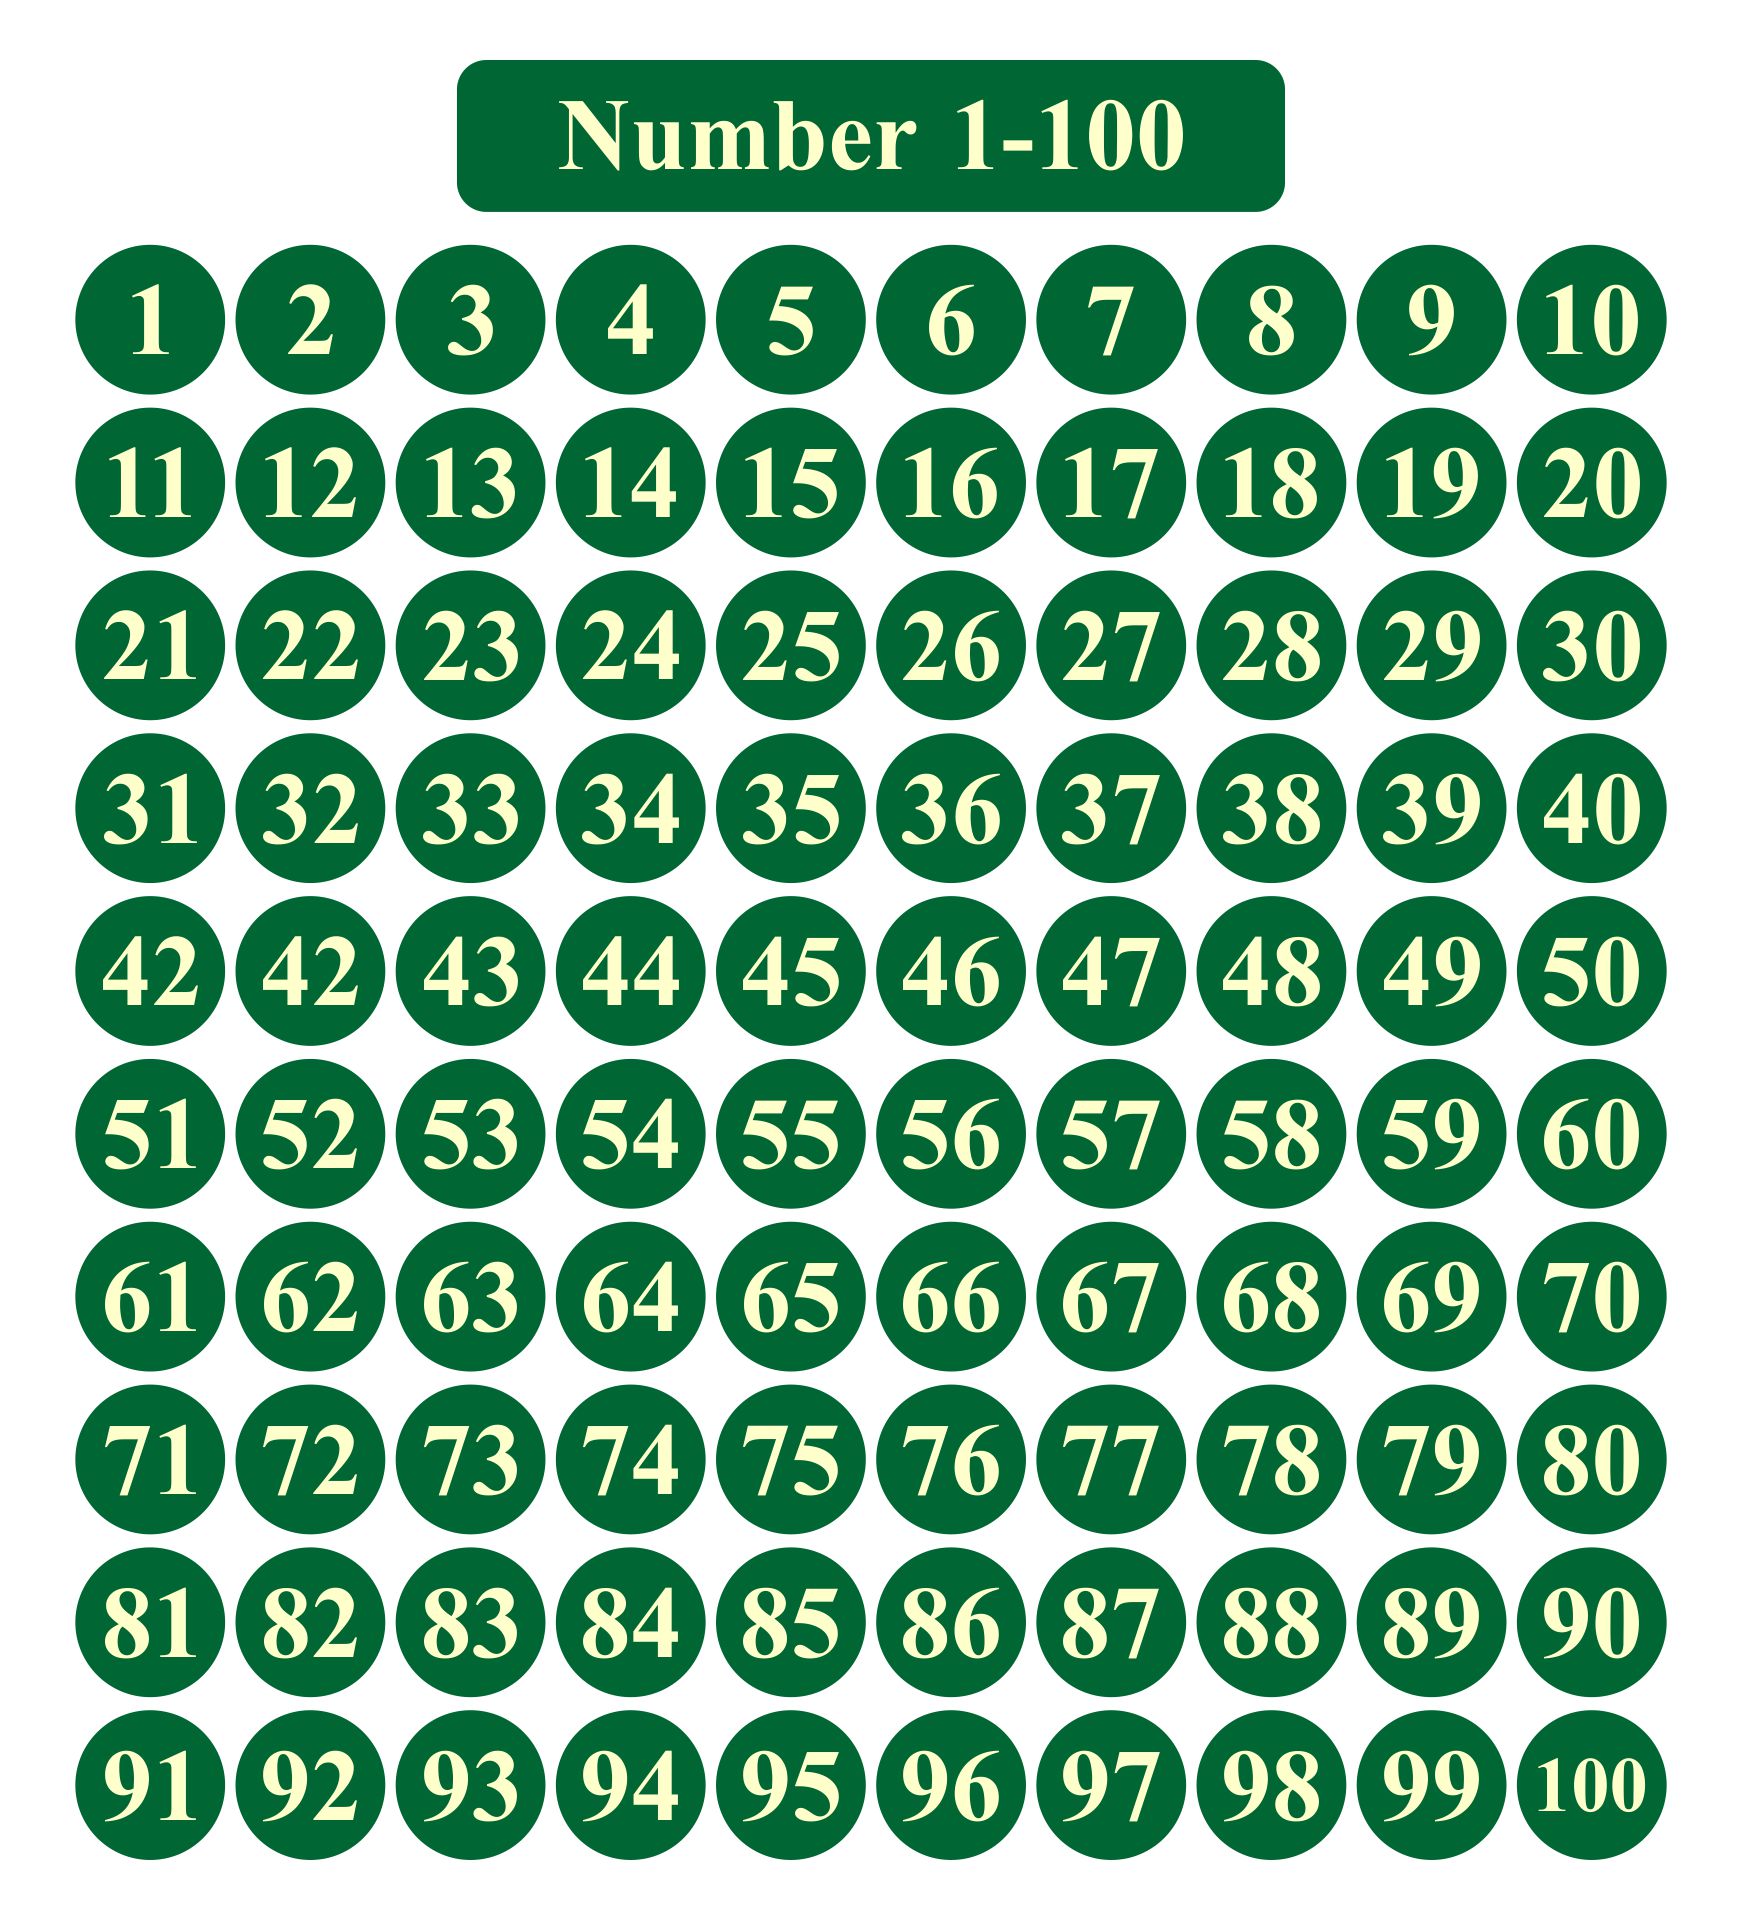 7 Best Images Of Number Cards 1 100 Printable Number Images And 